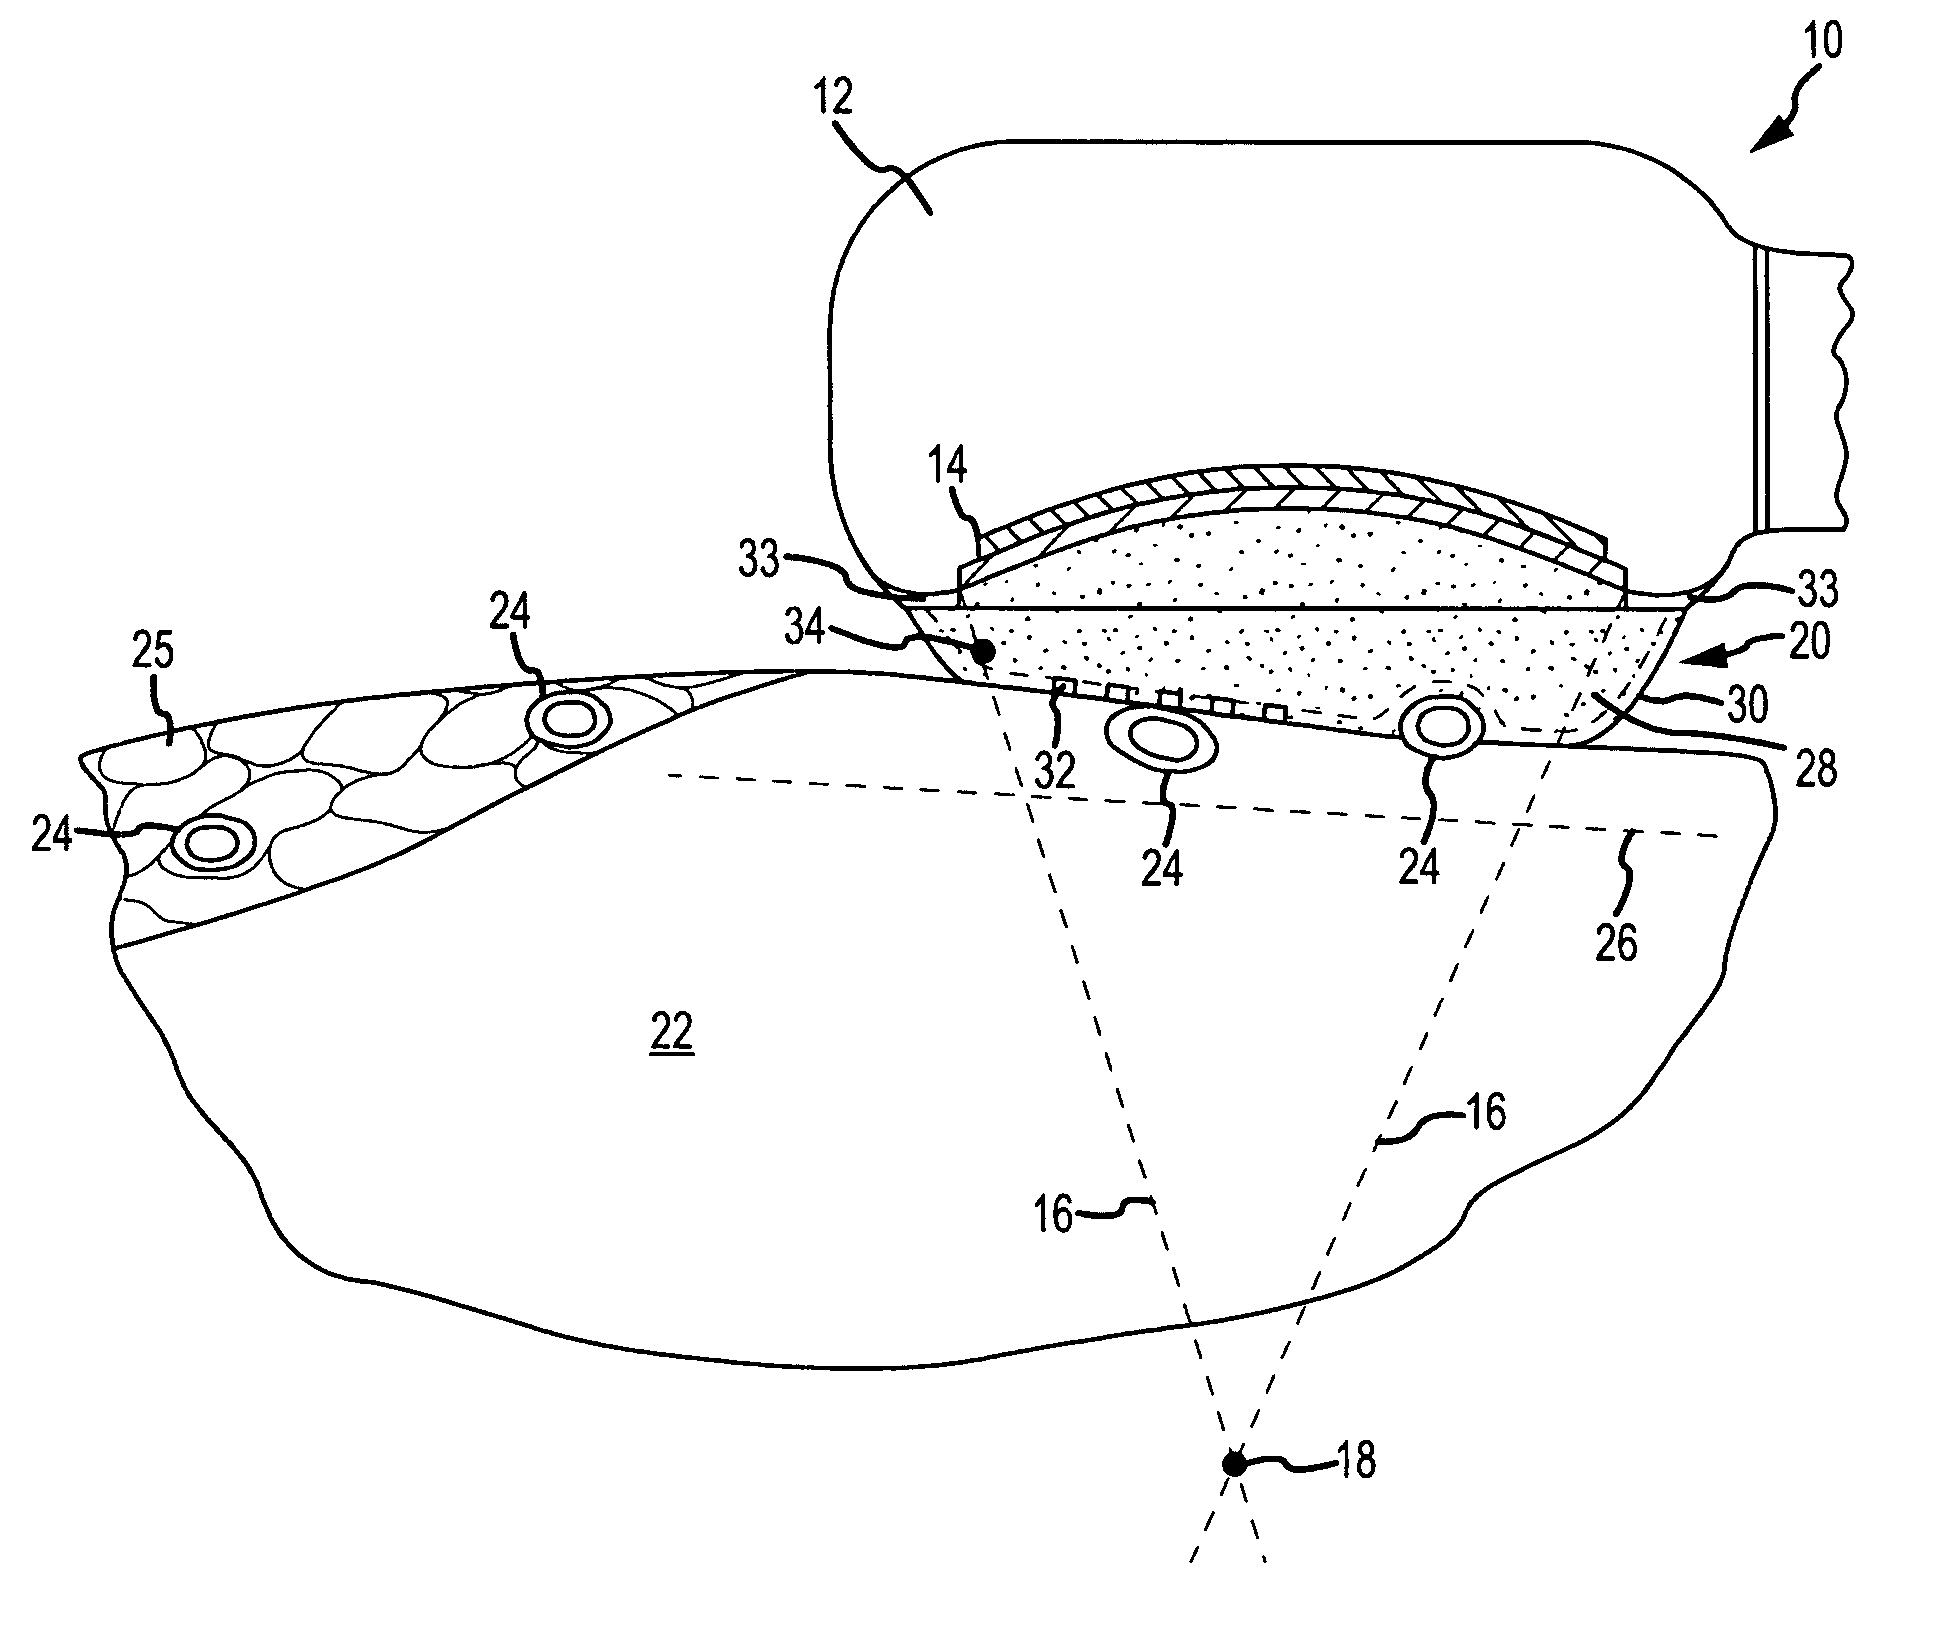 Apparatus and method for tissue ablation with near-field cooling